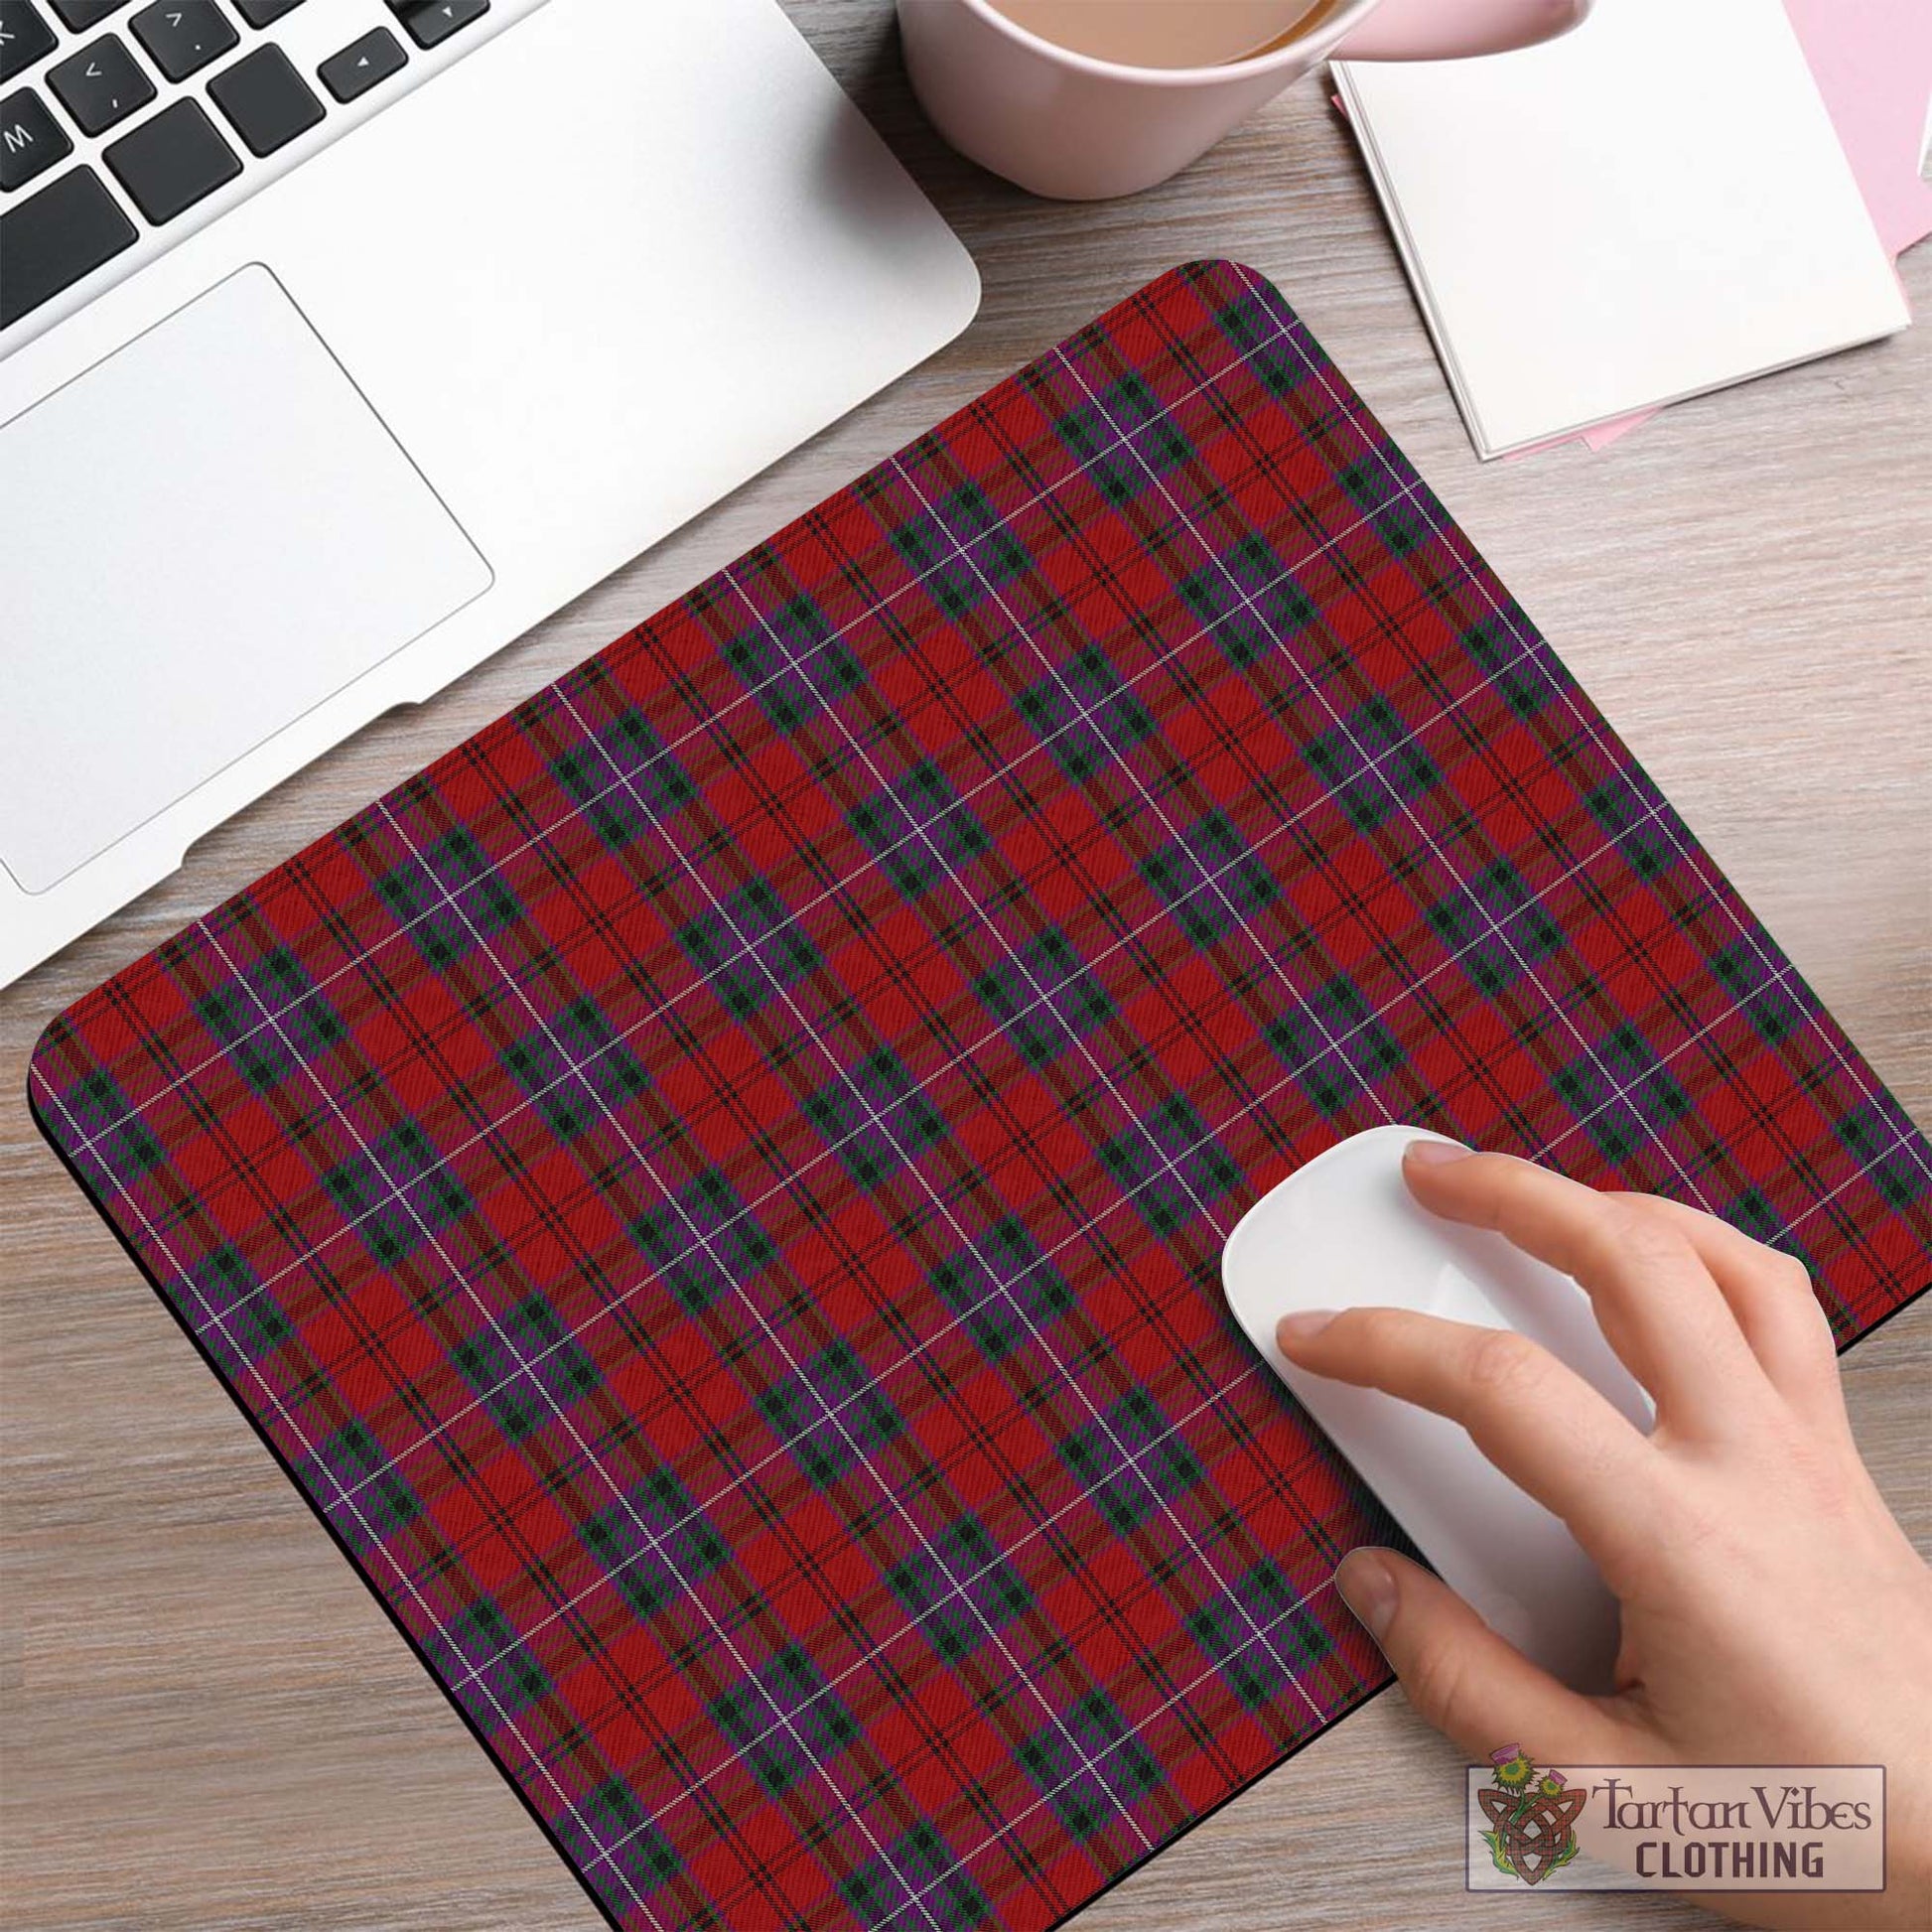 Tartan Vibes Clothing Kelly of Sleat Red Tartan Mouse Pad